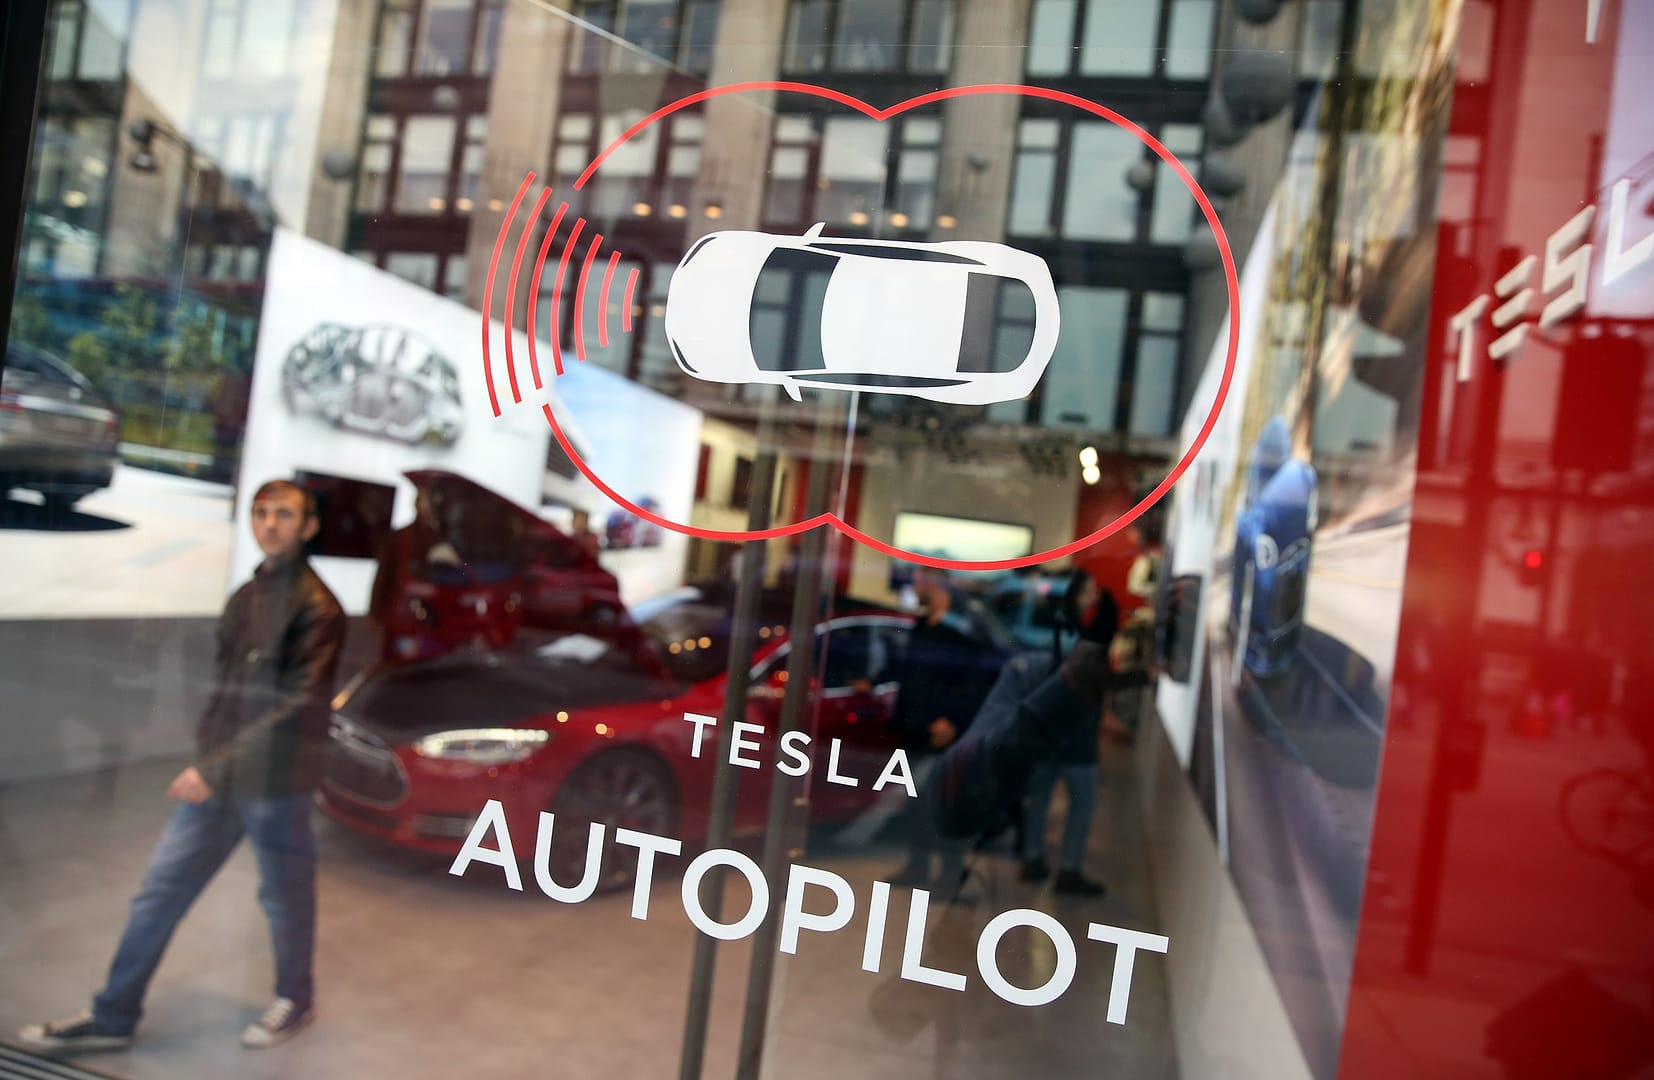 A decal advertising Tesla Motors Inc.'s Autopilot feature sits on a window of their showroom at a dealership, on Oxford Street in London, U.K., on Wednesday, Dec. 16, 2015. After losing $1.88 billion since 2007, Tesla is piling on the personnel as it offers more models, builds the worlds biggest battery factory and expands globally, including stores opening in Mexico City and Edinburgh.